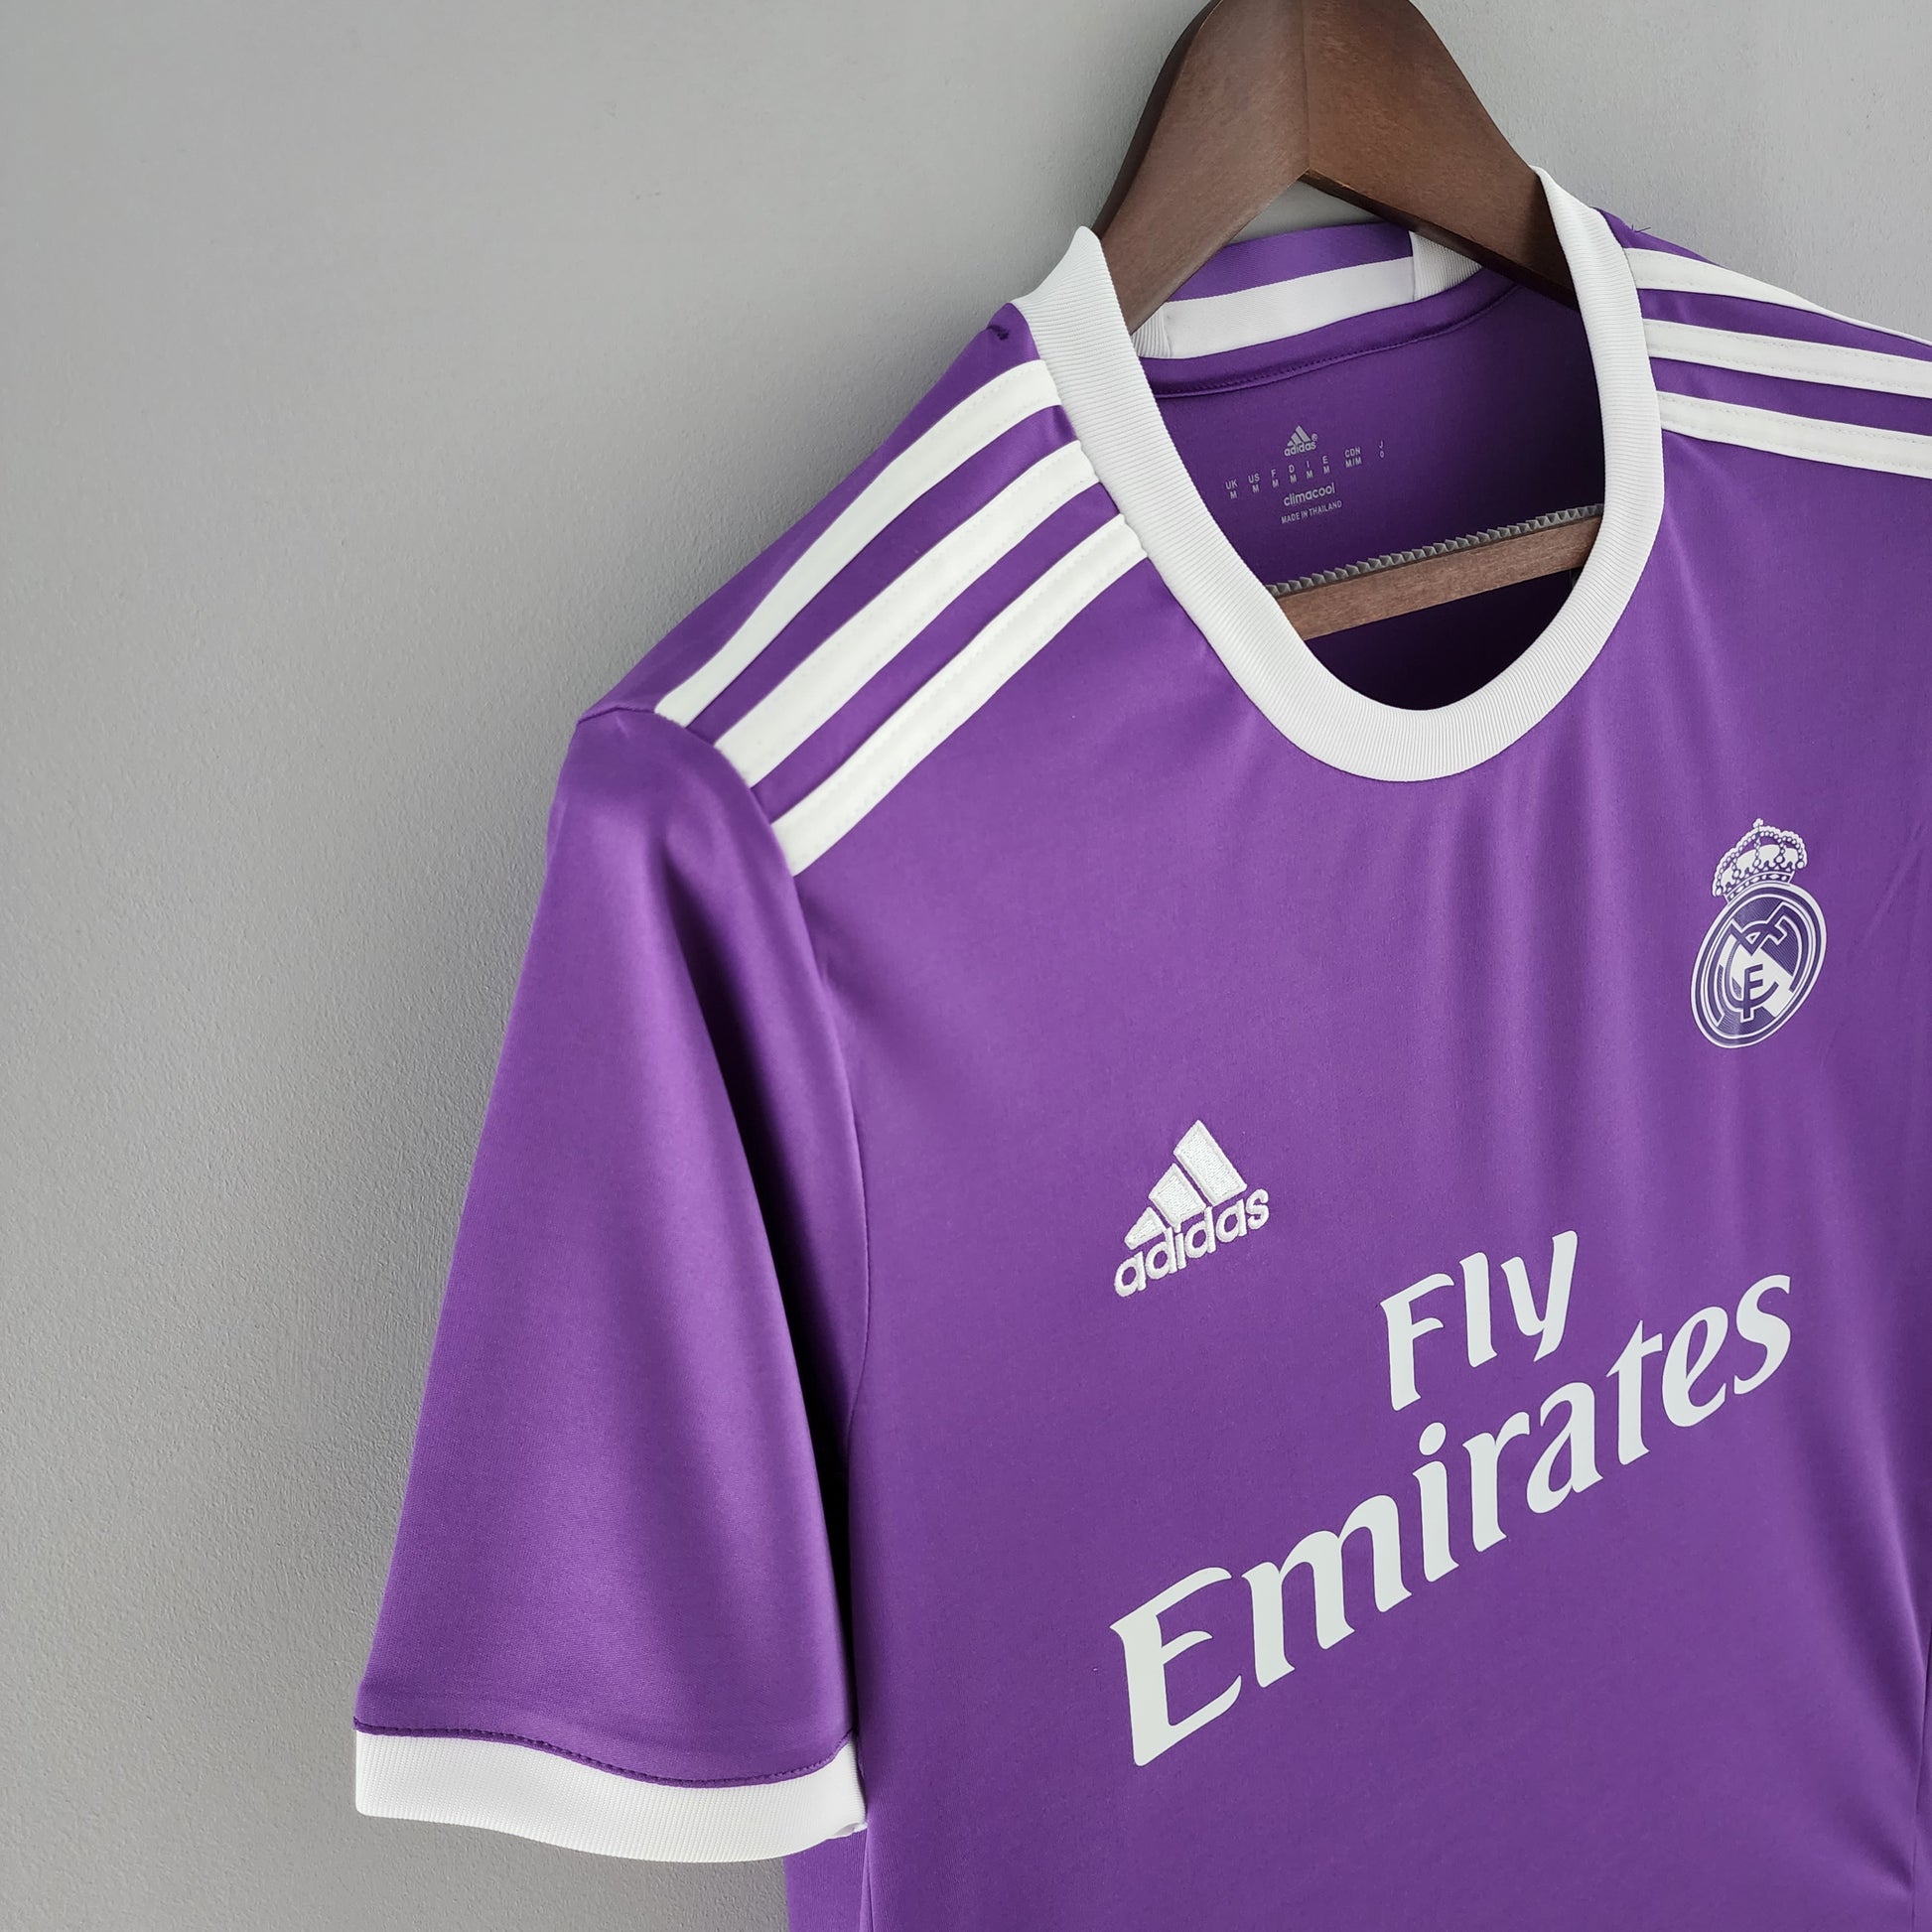 real madrid 2017 18 jersey